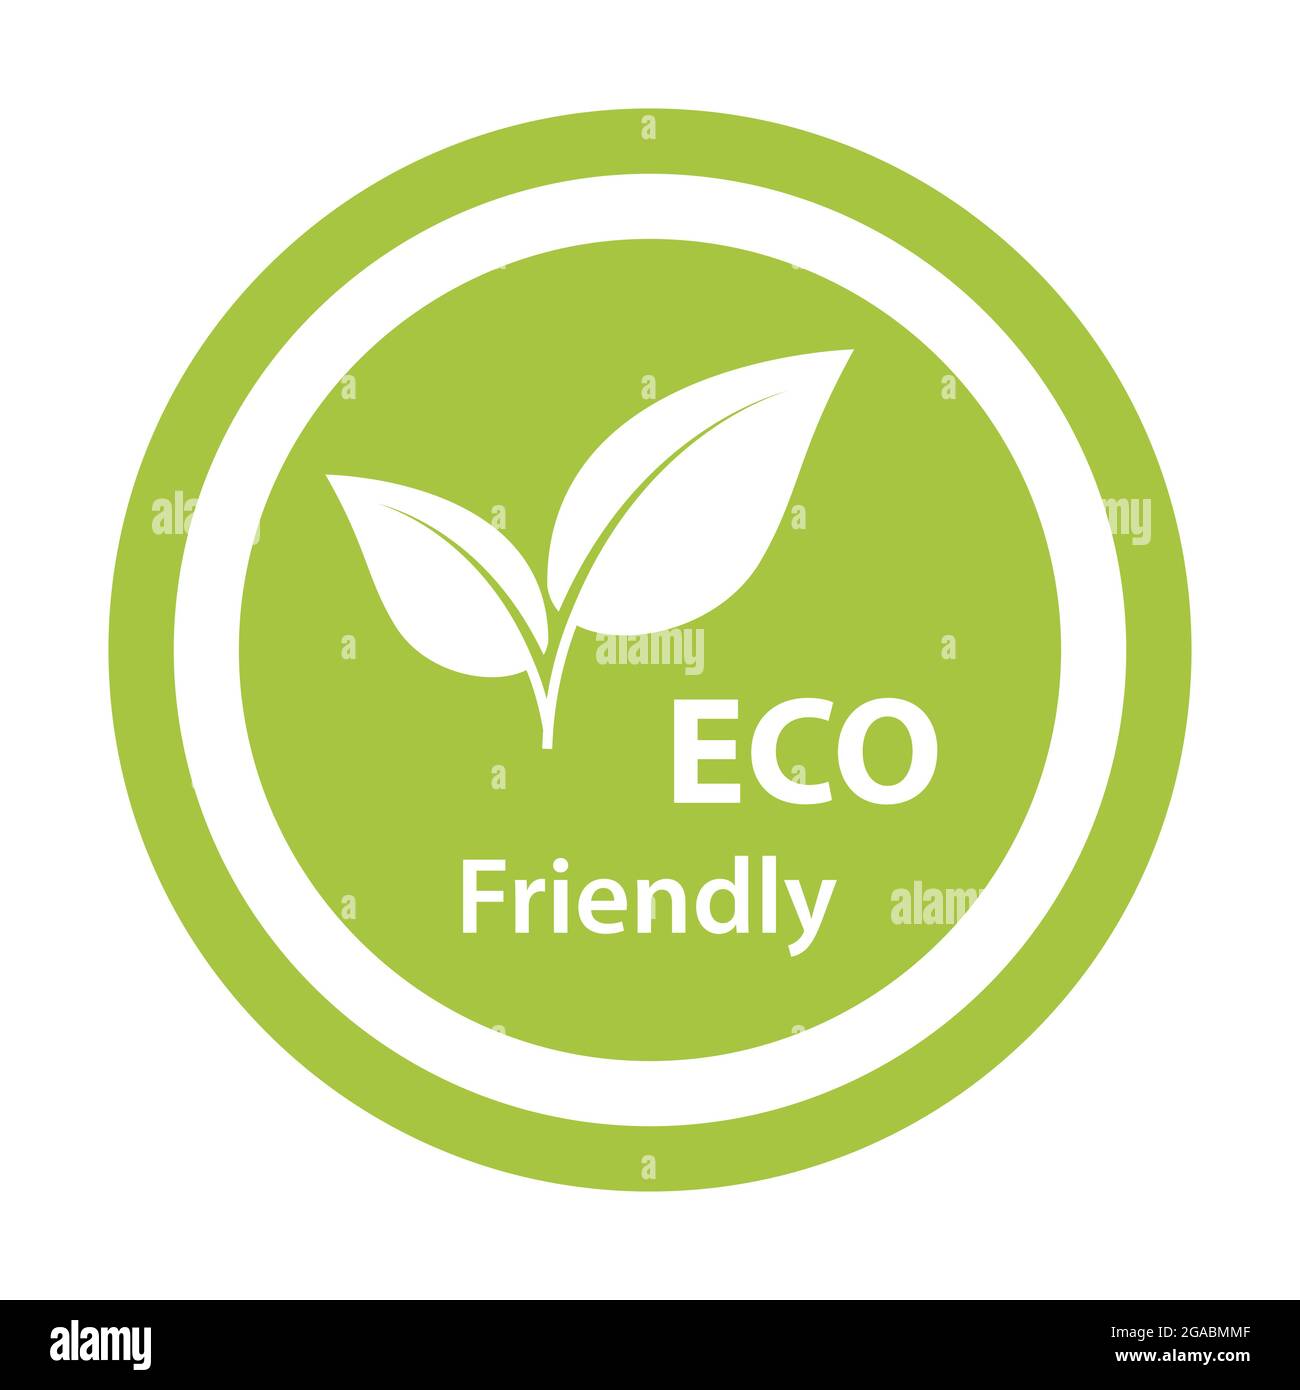 Eco friendly icon vector healthy natural product label logo for graphic design, logo, web site, social media, mobile app, ui illustration Stock Vector